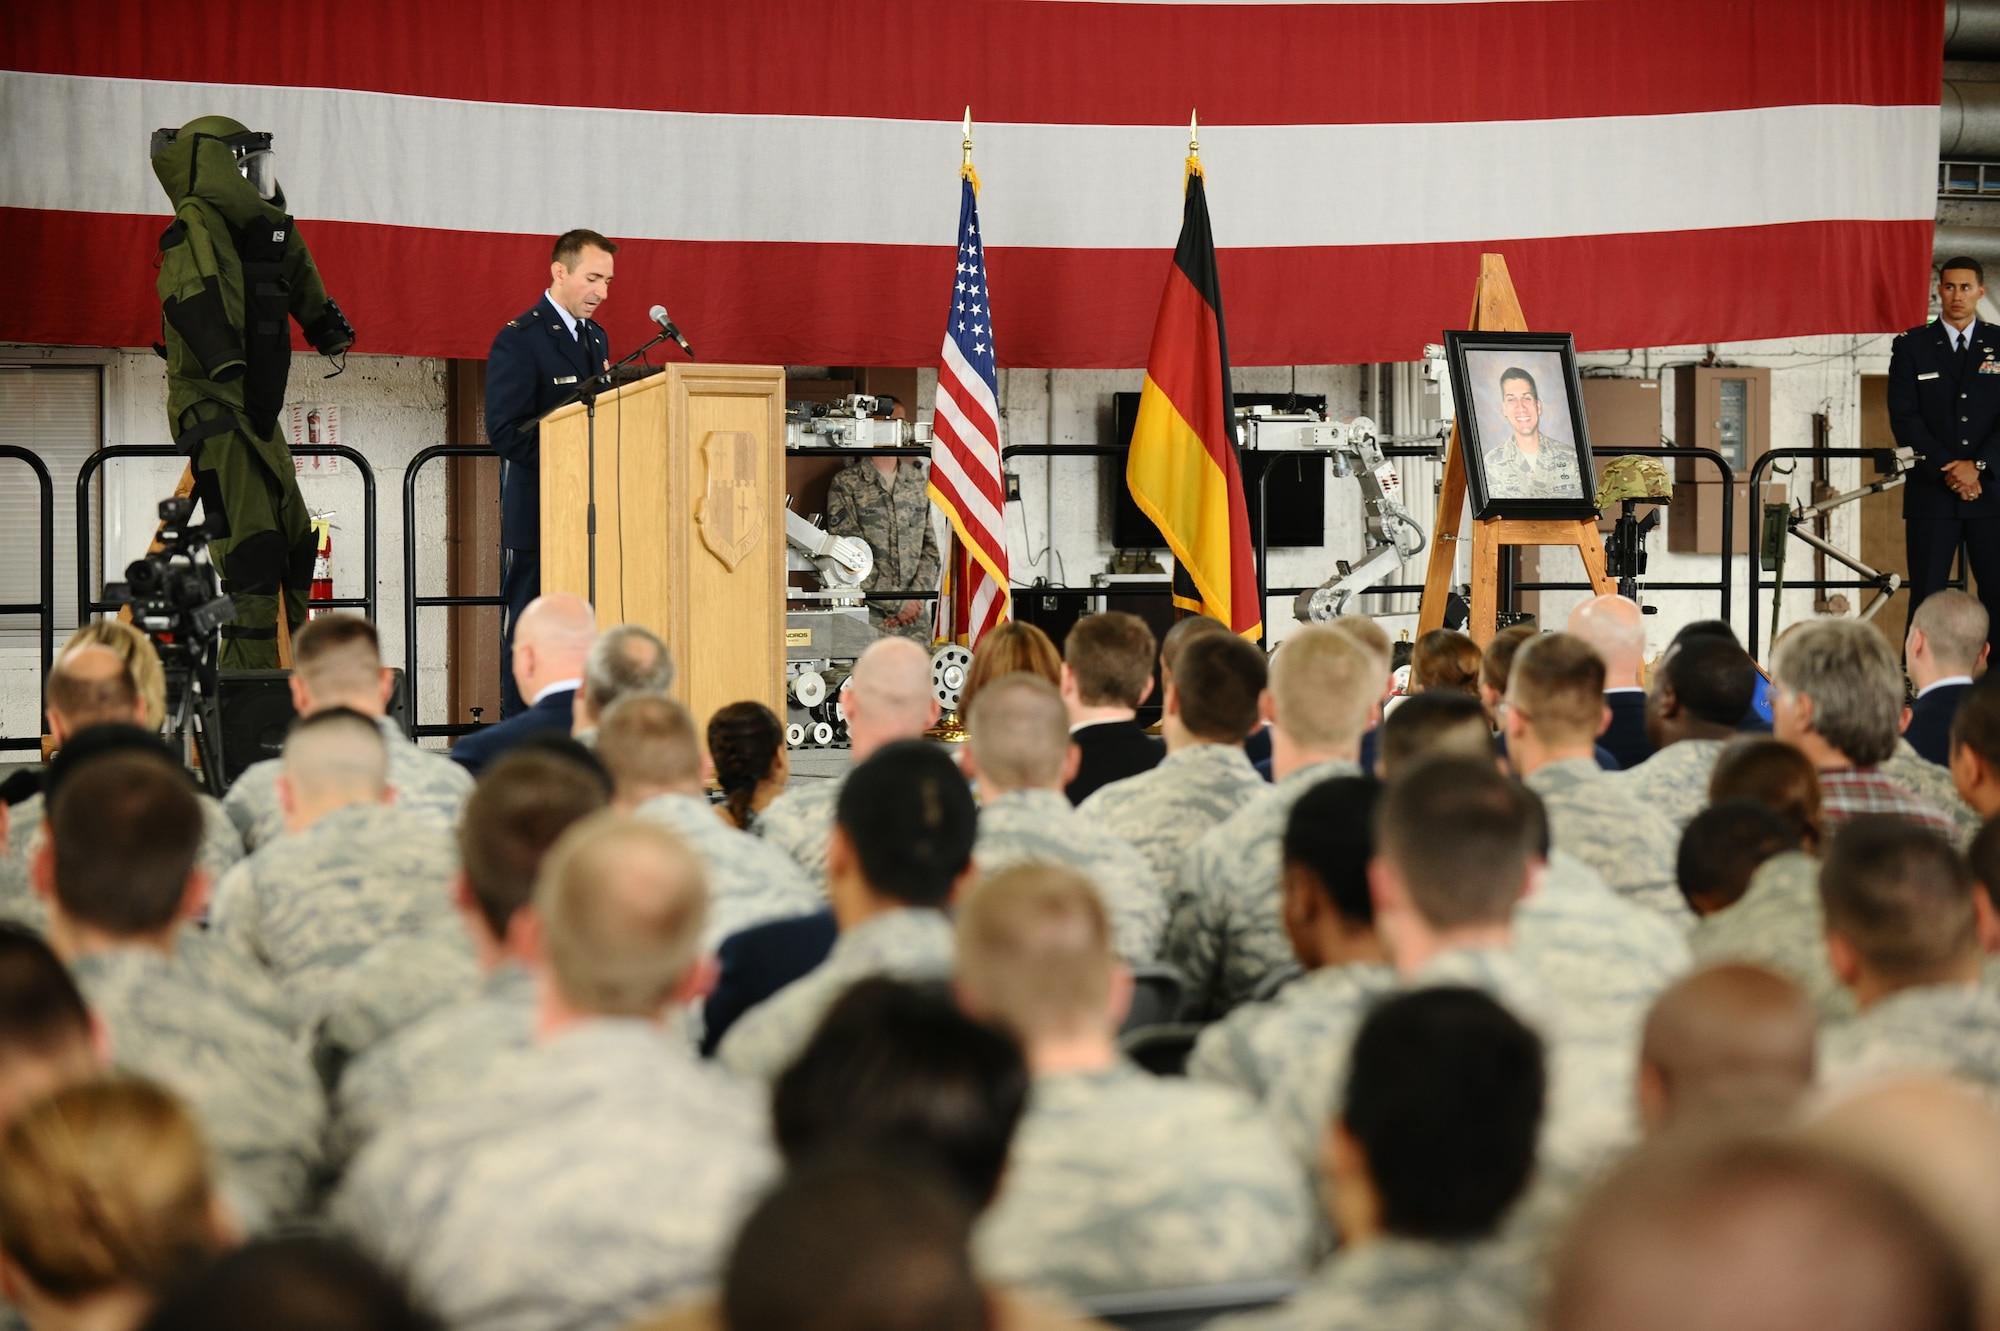 SPANGDAHLEM AIR BASE, Germany – Capt. Matthew Borawski, 52nd Civil Engineer Squadron Explosive Ordnance Disposal Flight commander, speaks during the memorial service for Staff Sgt. Joseph J. Hamski, 52nd CES EOD Flight, held here June 16. Sergeant Hamski was killed in action May 26, 2011, in Shorabak, Afghanistan, while responding to a known enemy weapons cache. (U.S. Air Force photo/Senior Airman Nathanael Callon)